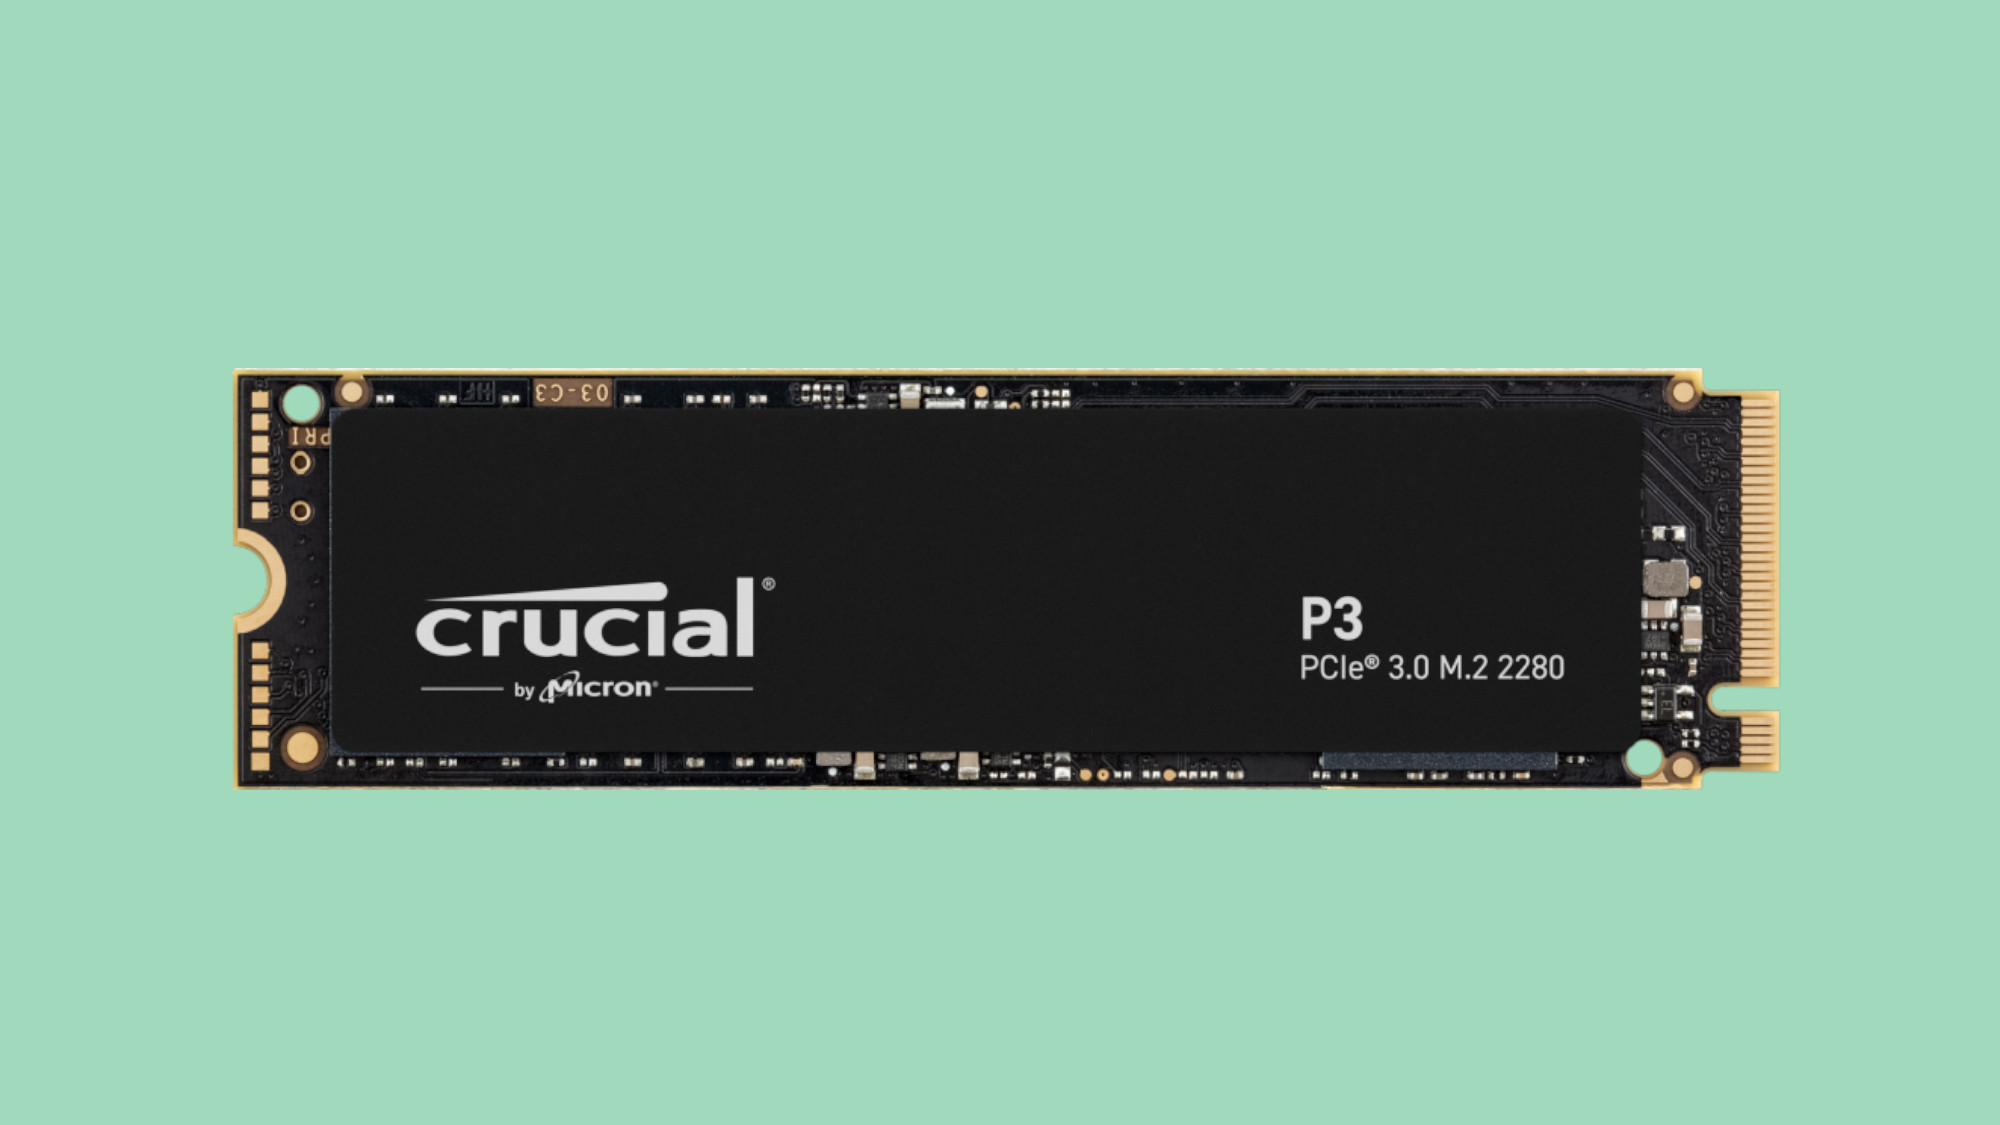 Crucial P3 SSD on light green background